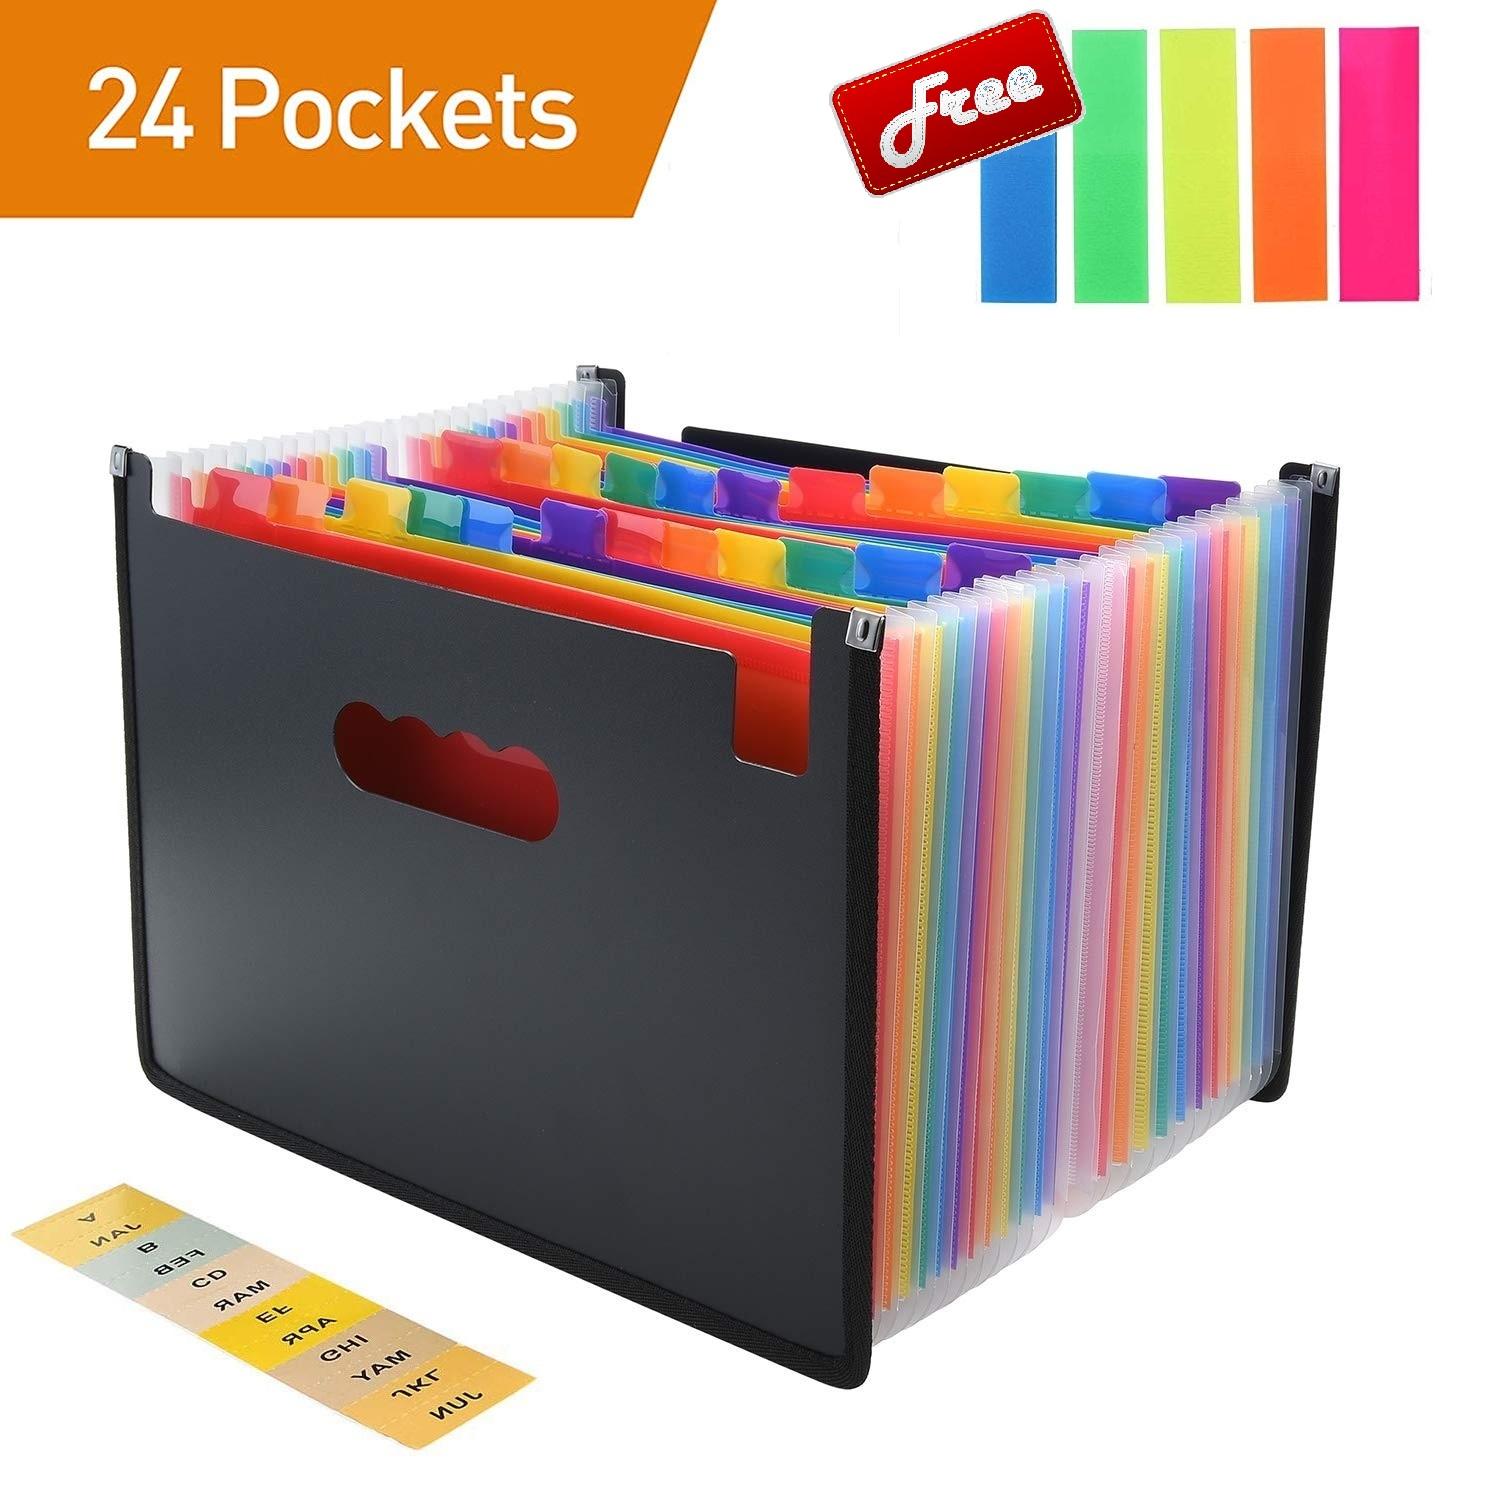 Red 13 Pockets Expanding File Folder Large Space Design A4 Filing Folders Box File Business Home Office Document Accordion File Storage Bag 